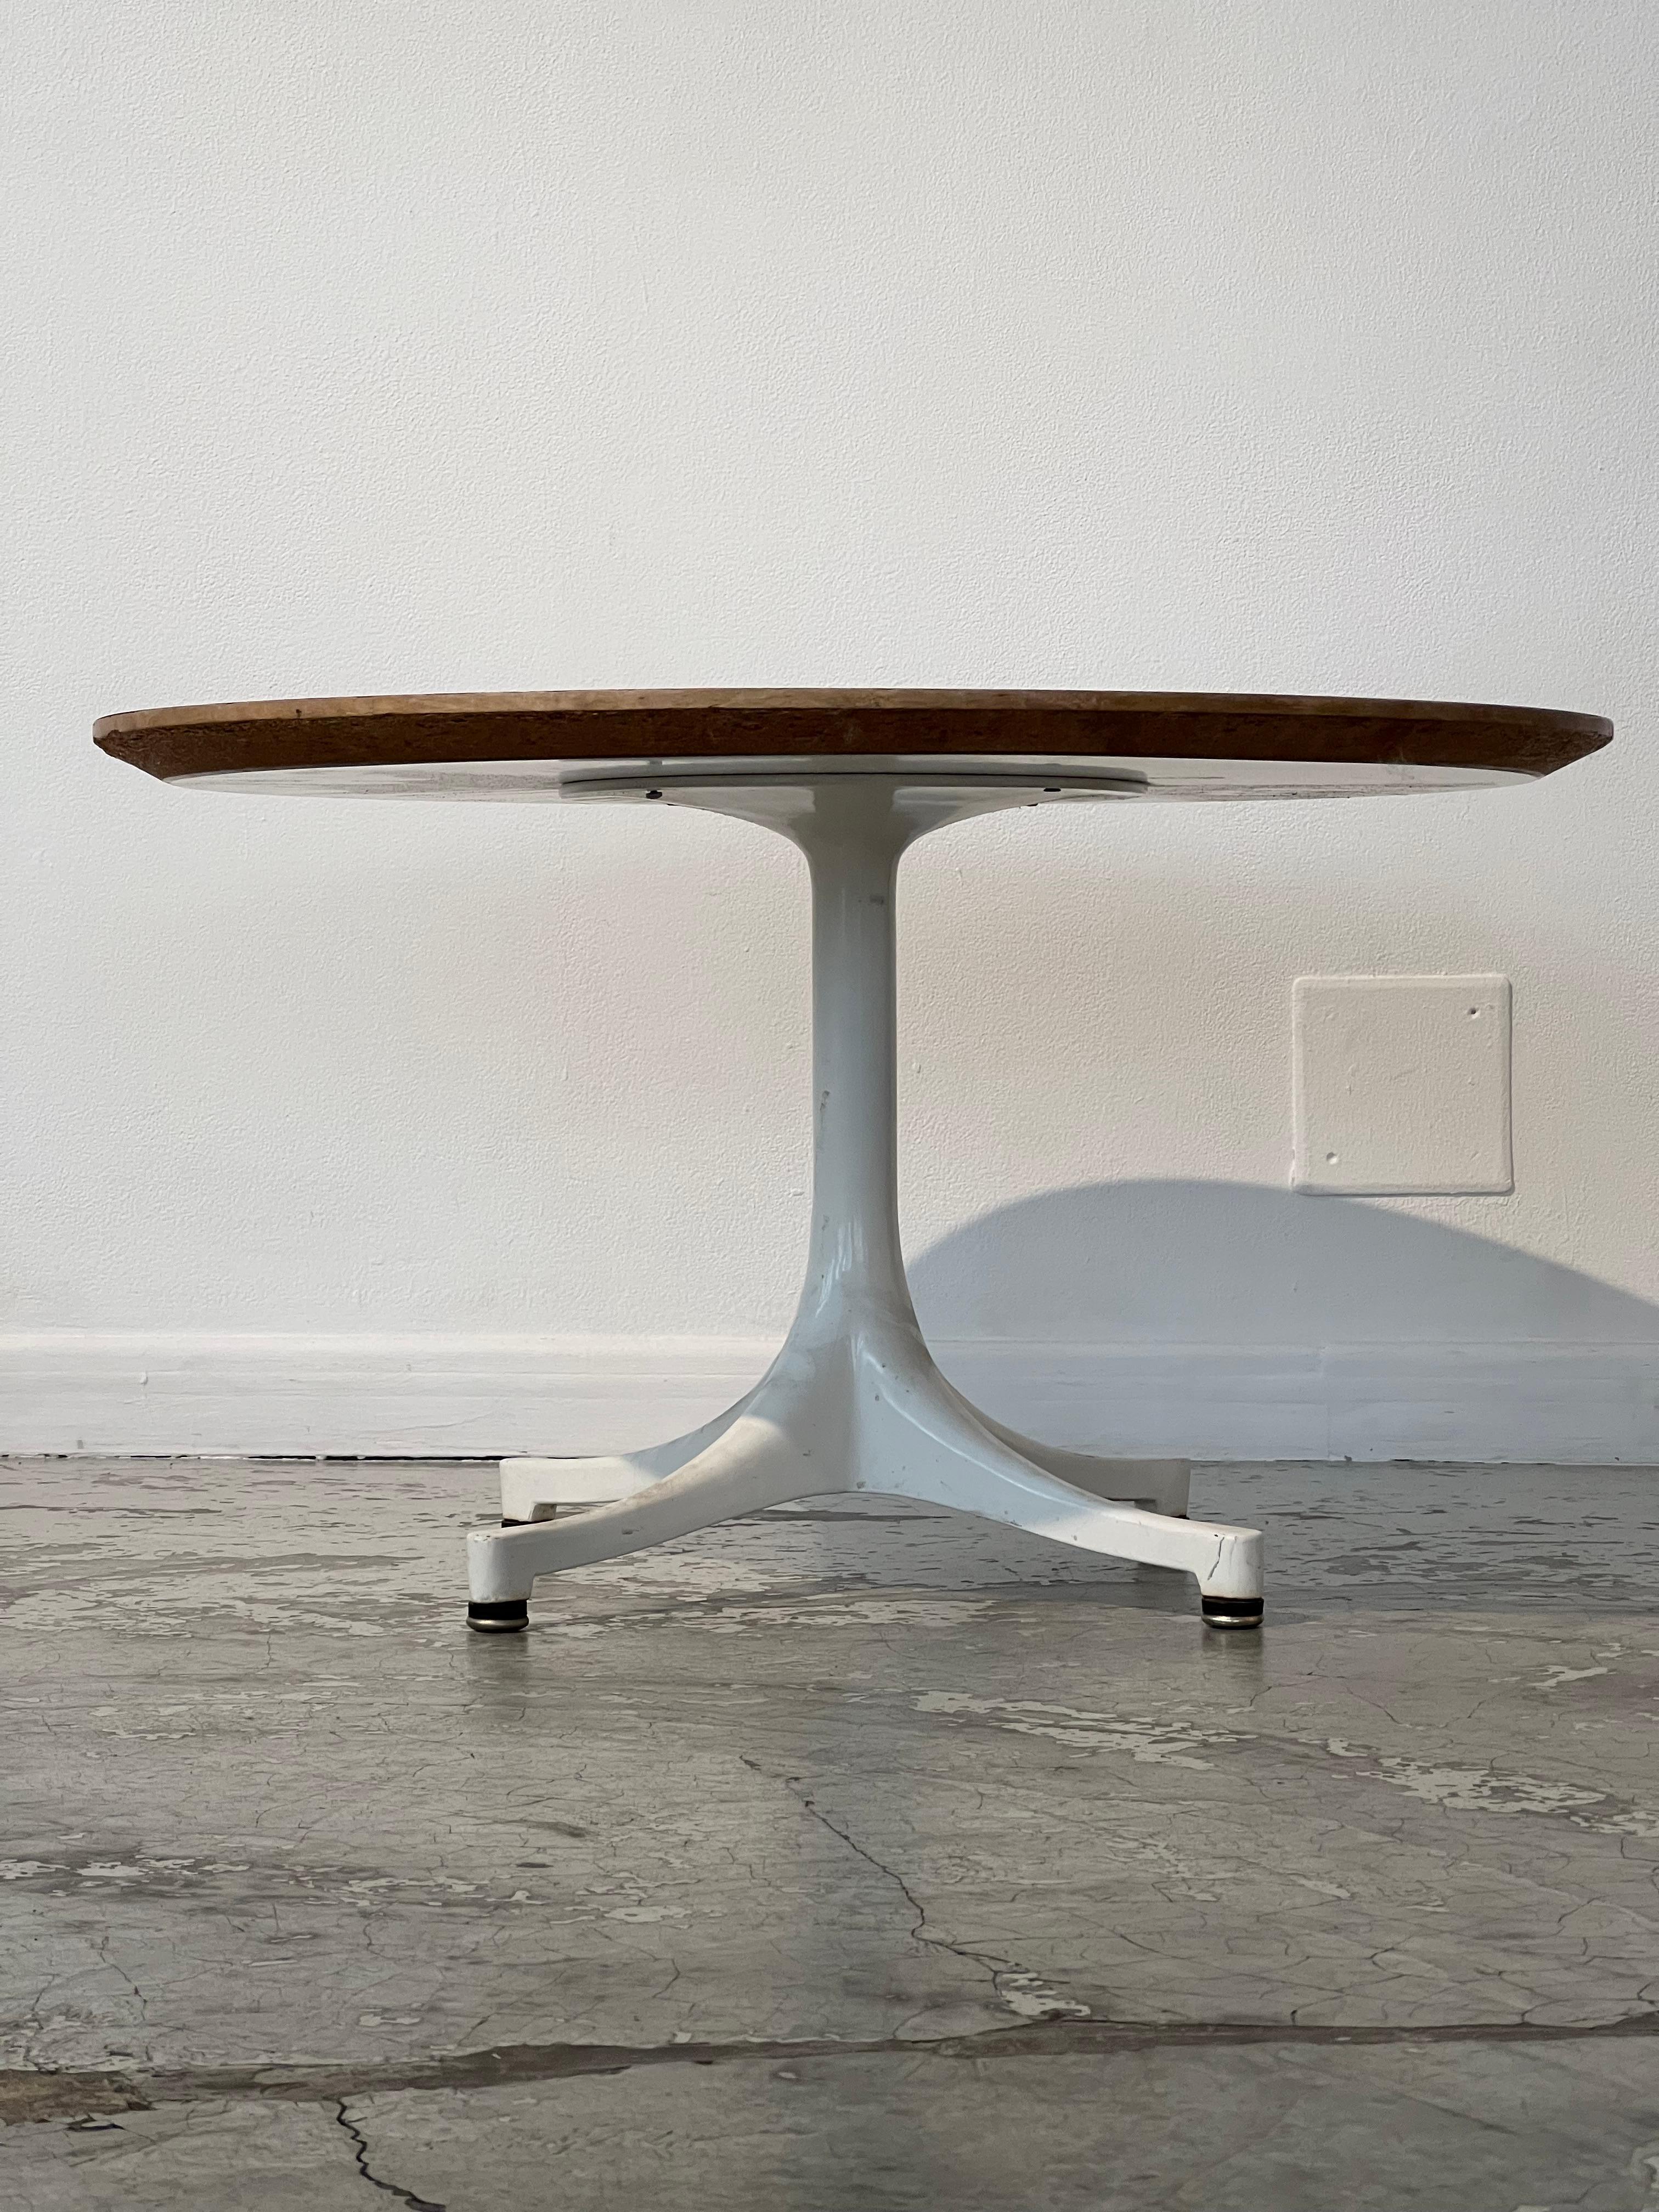 Side table by Charles Eames for Herman Miller. This model was designed in the 50s for the American firm. The relationship between Charles Eames and Herman Miller was an emblematic collaboration that revolutionised design and furniture in the 20th